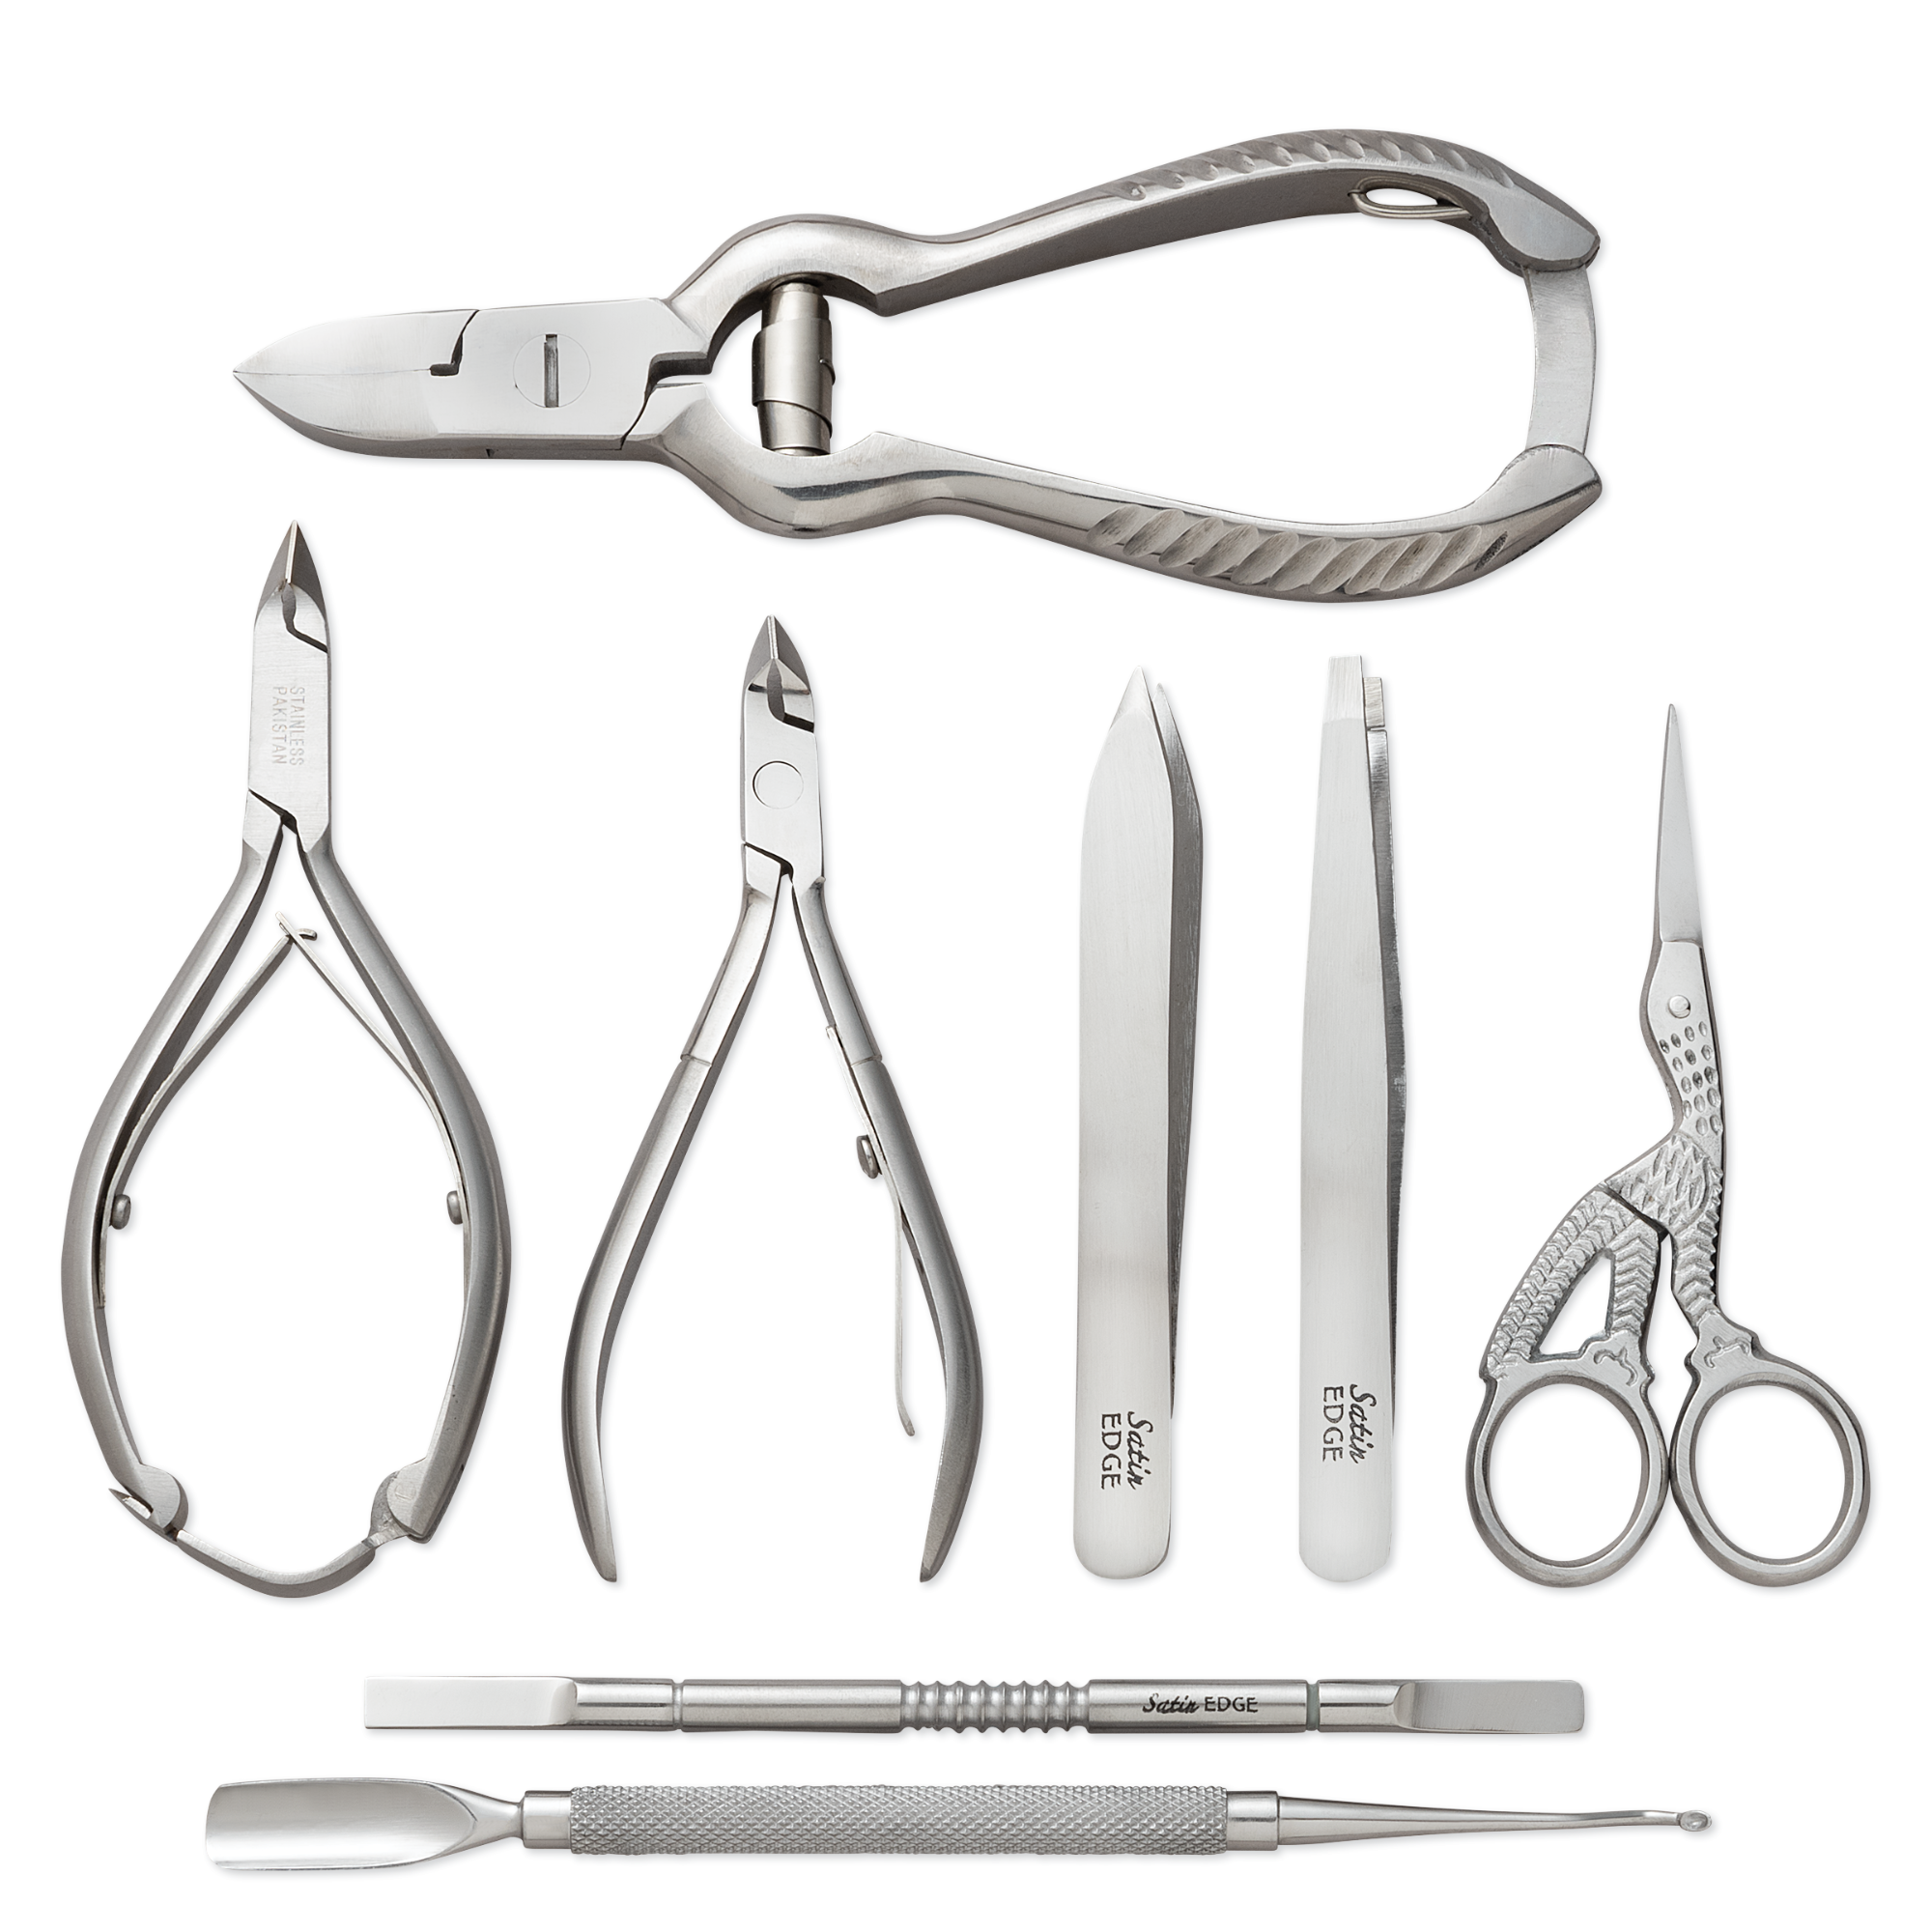 Manicure/Pedicure Set, Stainless Steel